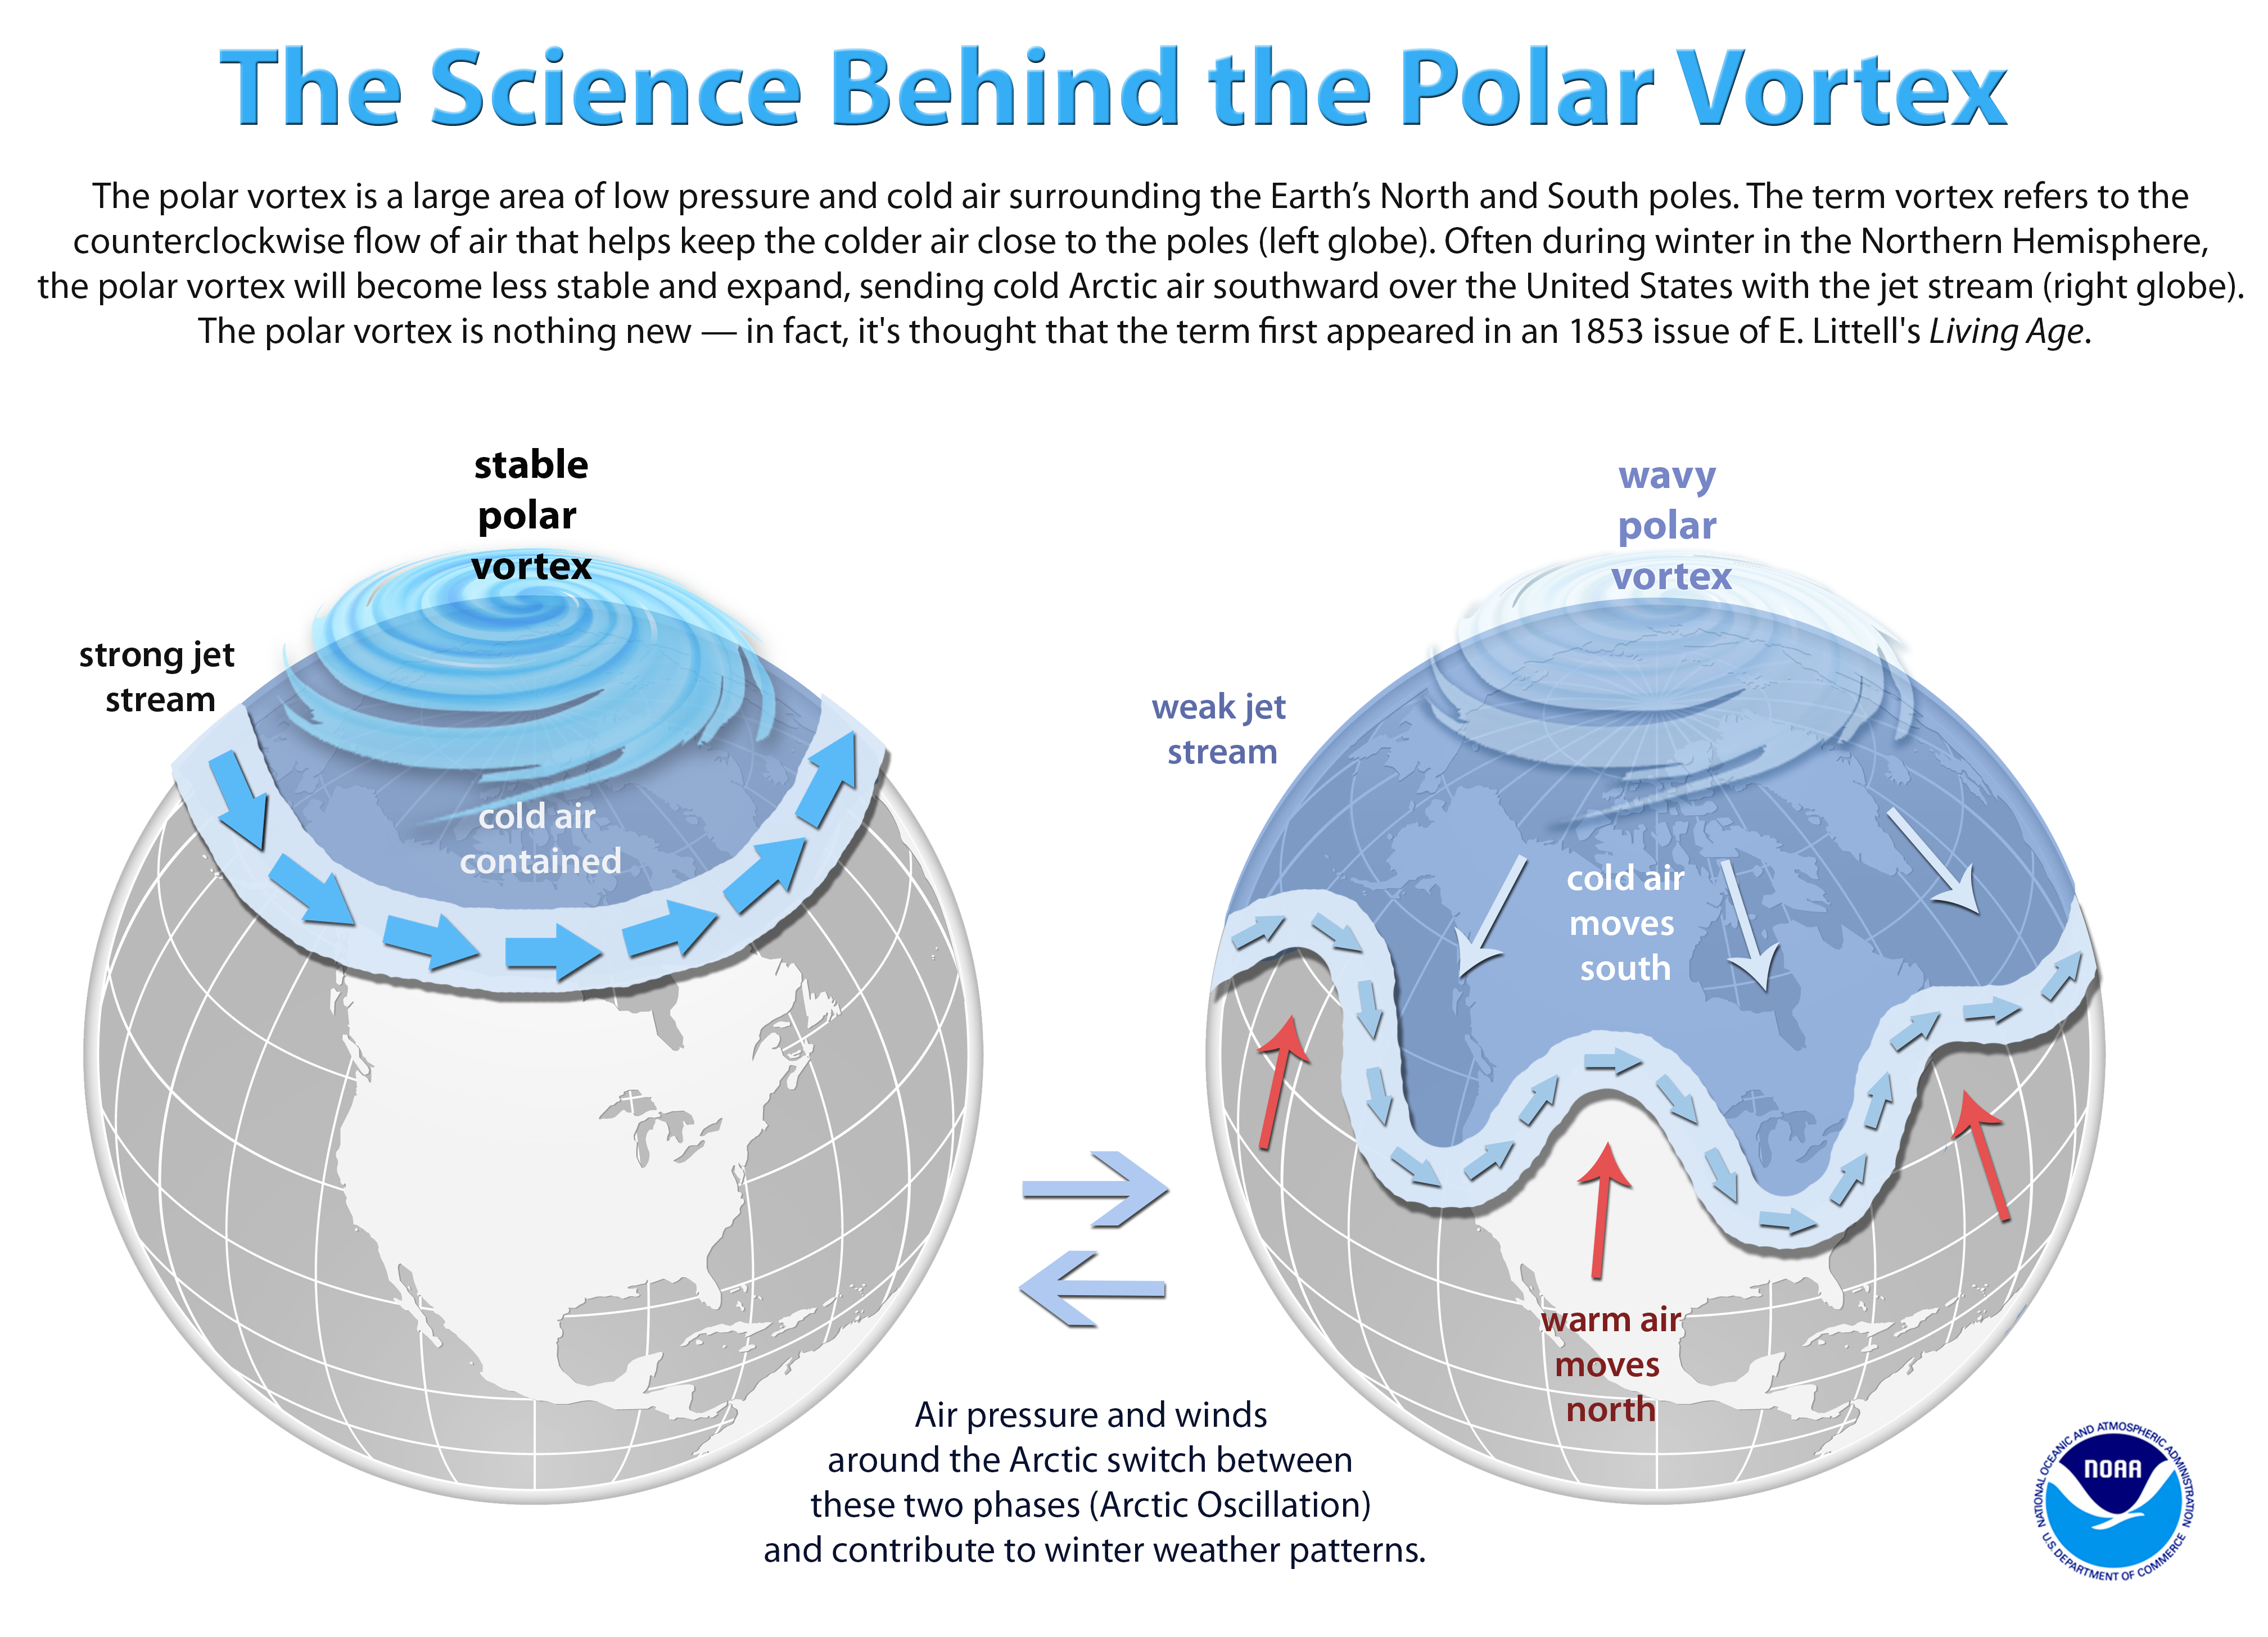 Extreme cold still happens in a warming world – in fact climate instability  may be disrupting the polar vortex